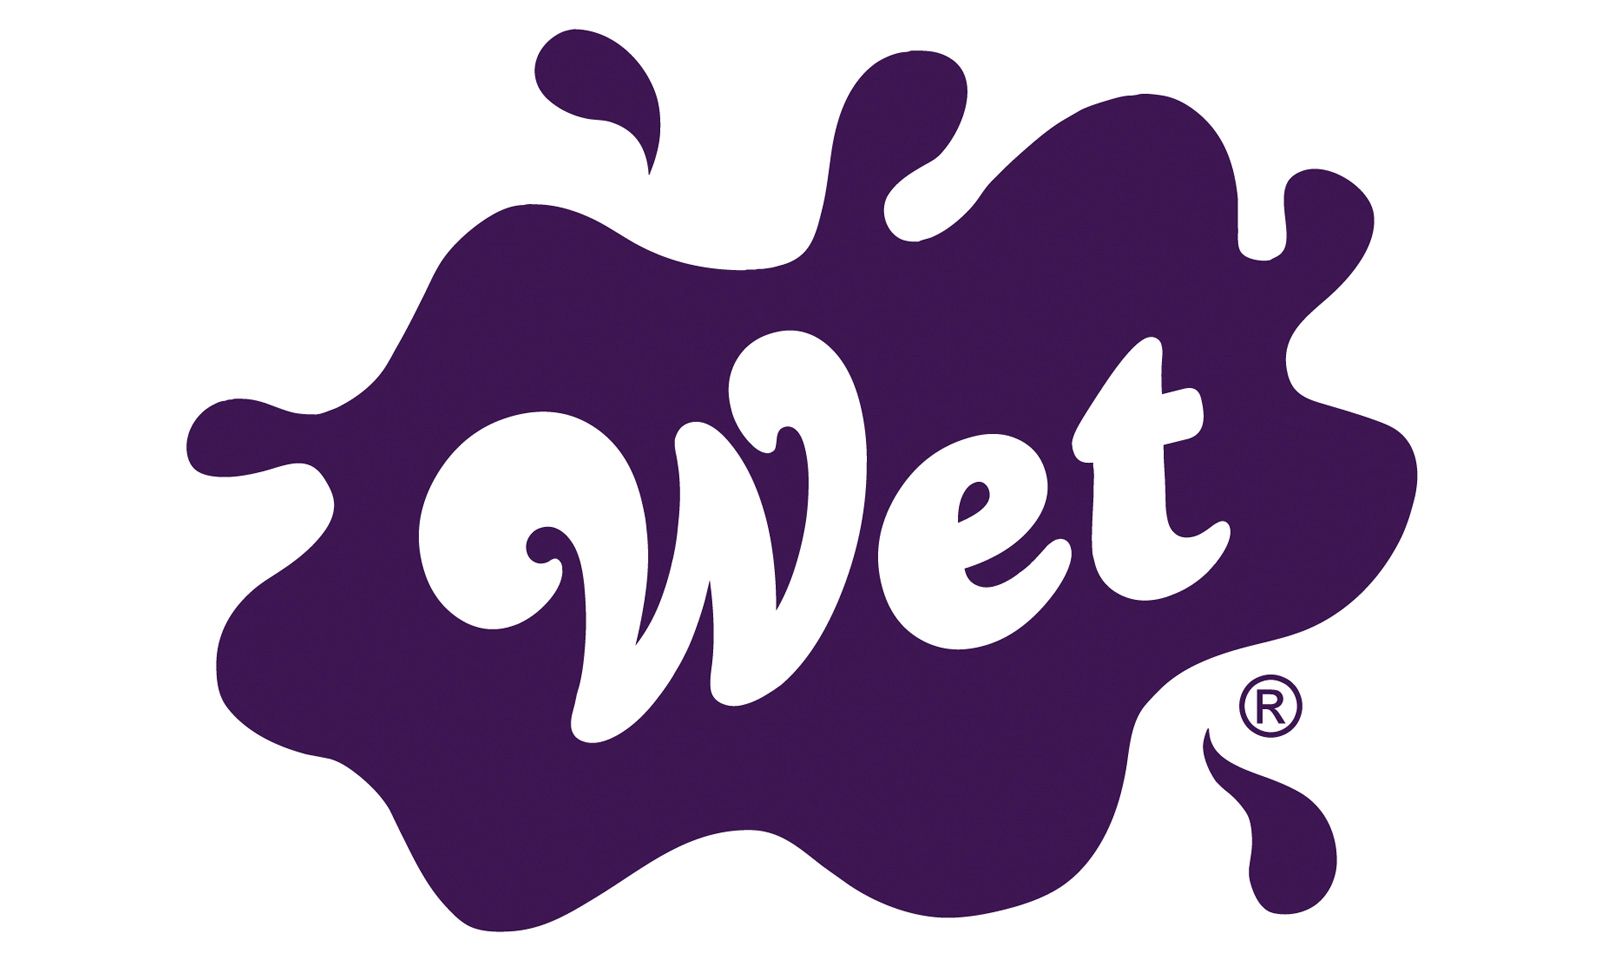 Wet Presents Clean, Sexy, New Look For Product Line